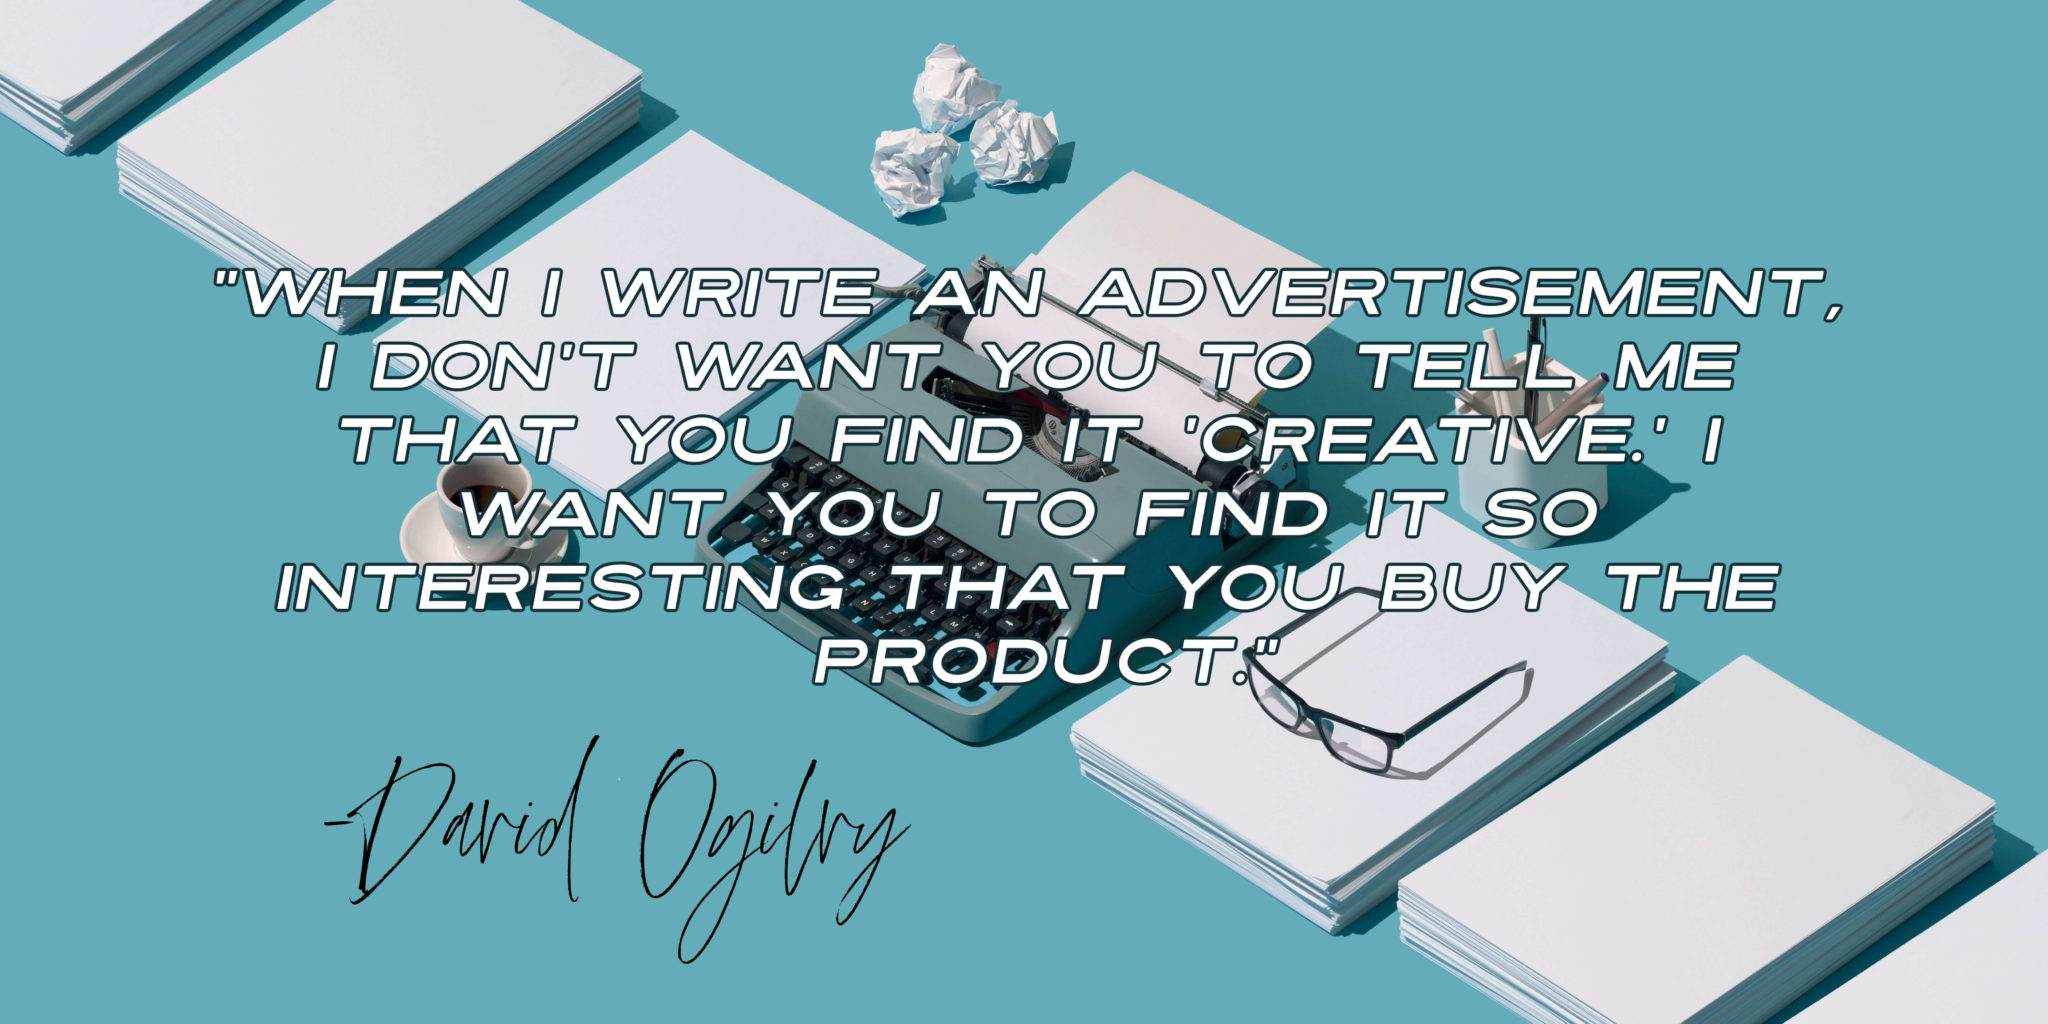 David Ogilvy quote "When I write an advertisement, I don’t want you to tell me that you find it ‘creative.’ I want you to find it so interesting that you buy the product."